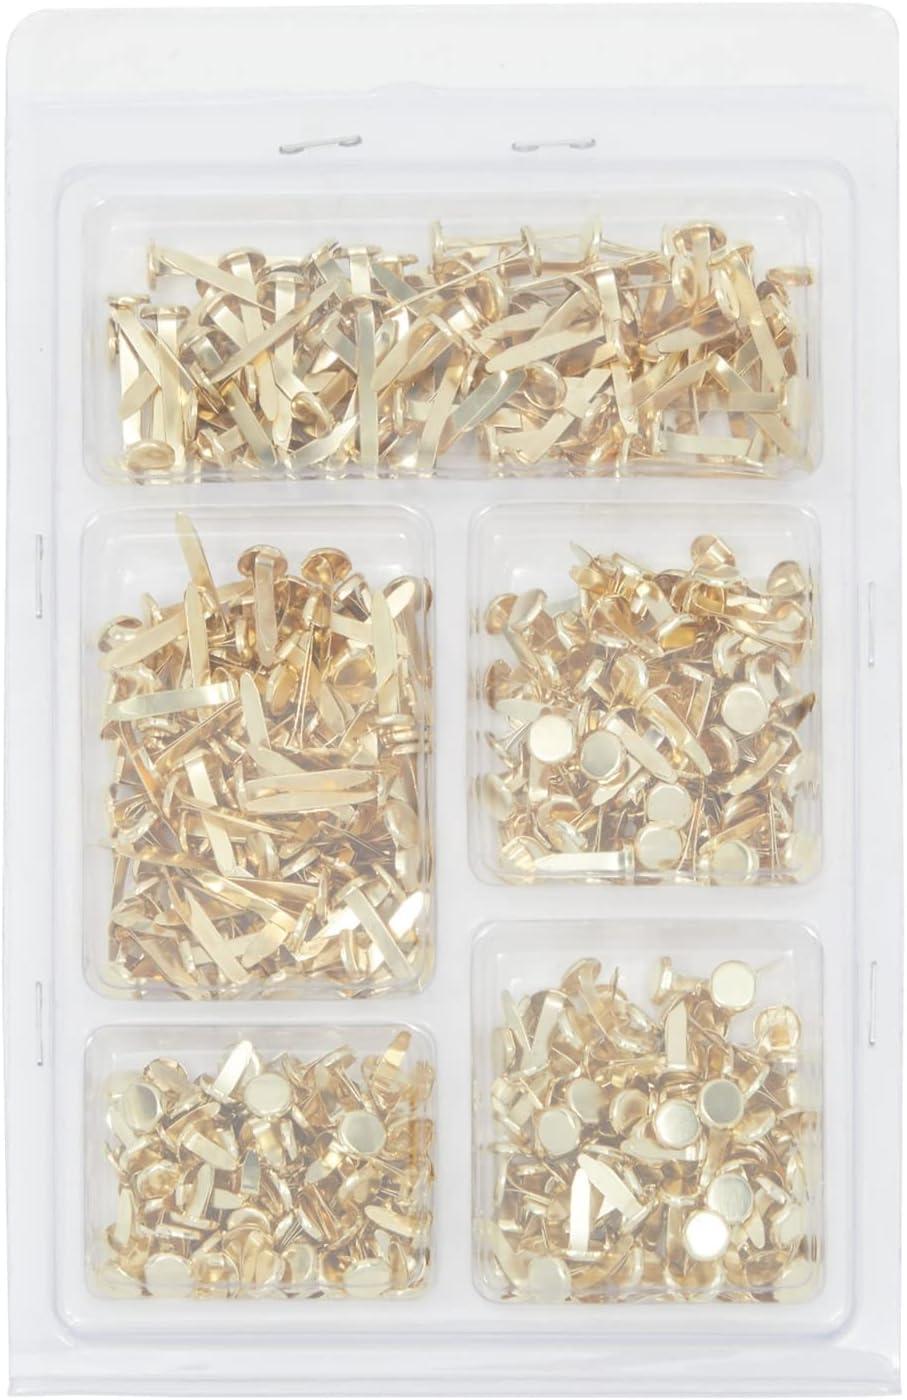 500 Pieces Mini Metal Brads for Crafts, Split Pin Brass Paper Fasteners for  Scrapbooking, Handmade Cards, DIY Projects, 5 Assorted Sizes